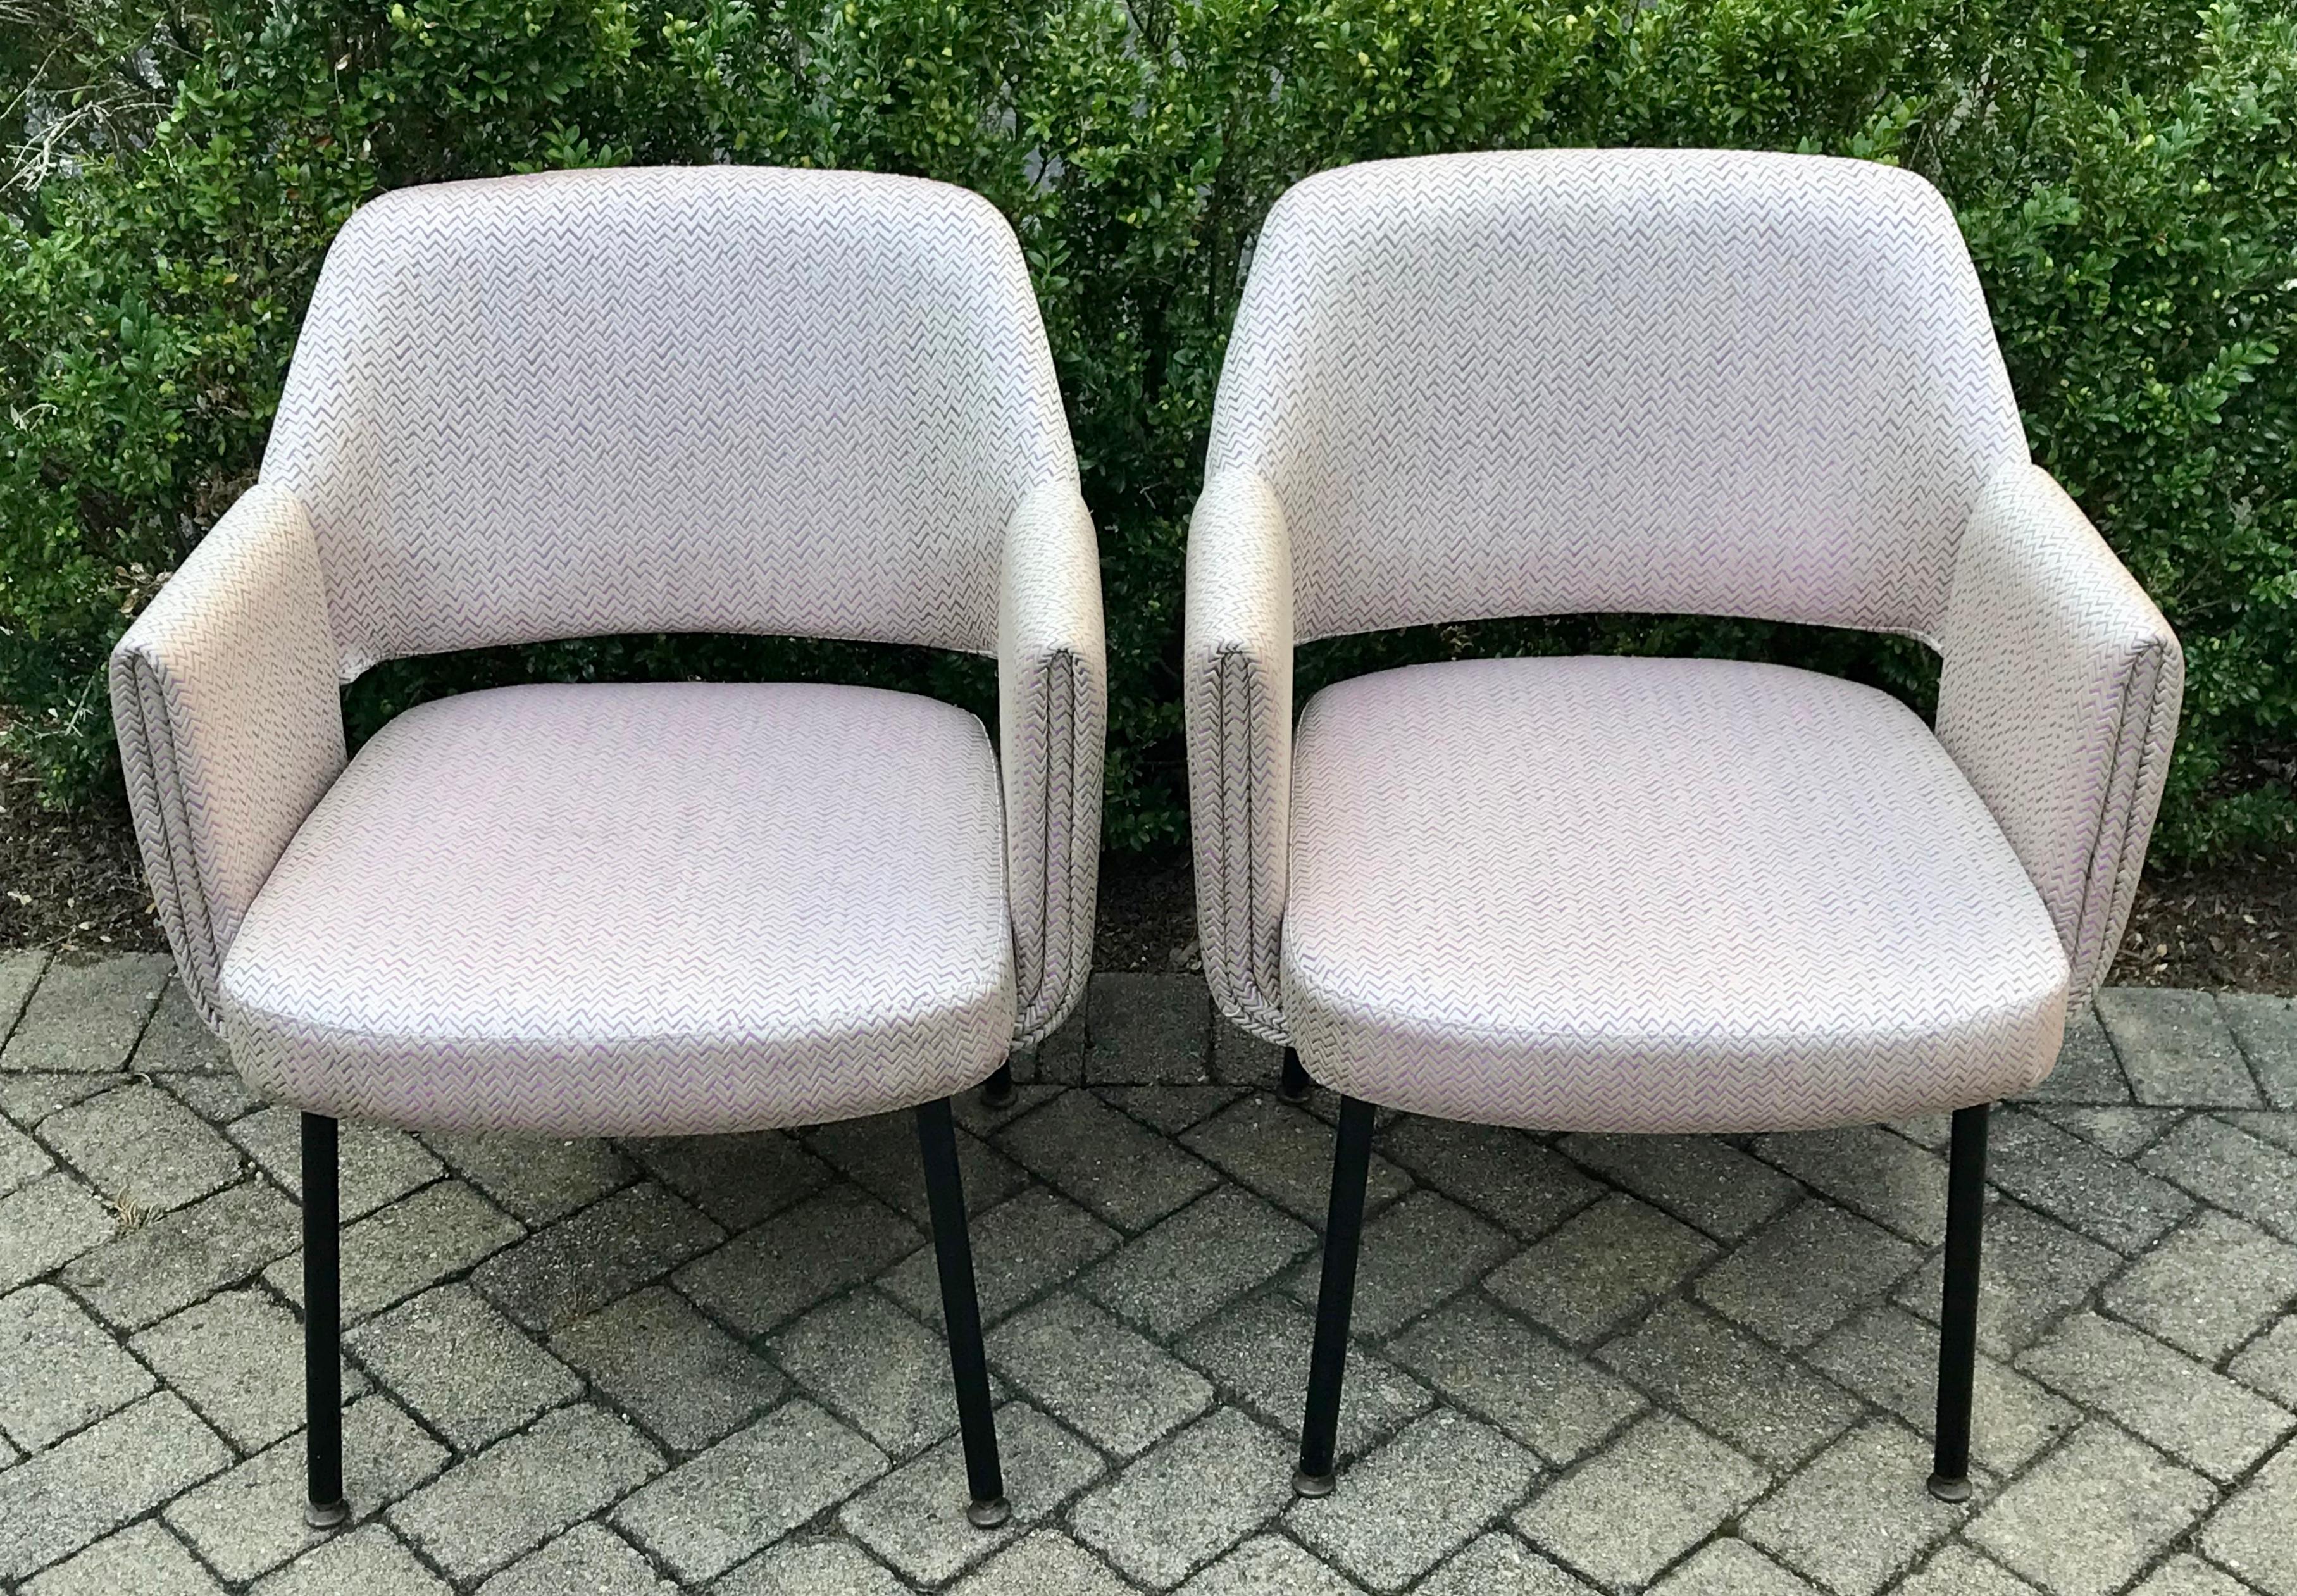 Rare pair of Mid-Century Modern dining or side chairs designed by Marc Simon for the dining room of the SS France Luxury Liner, 1962.